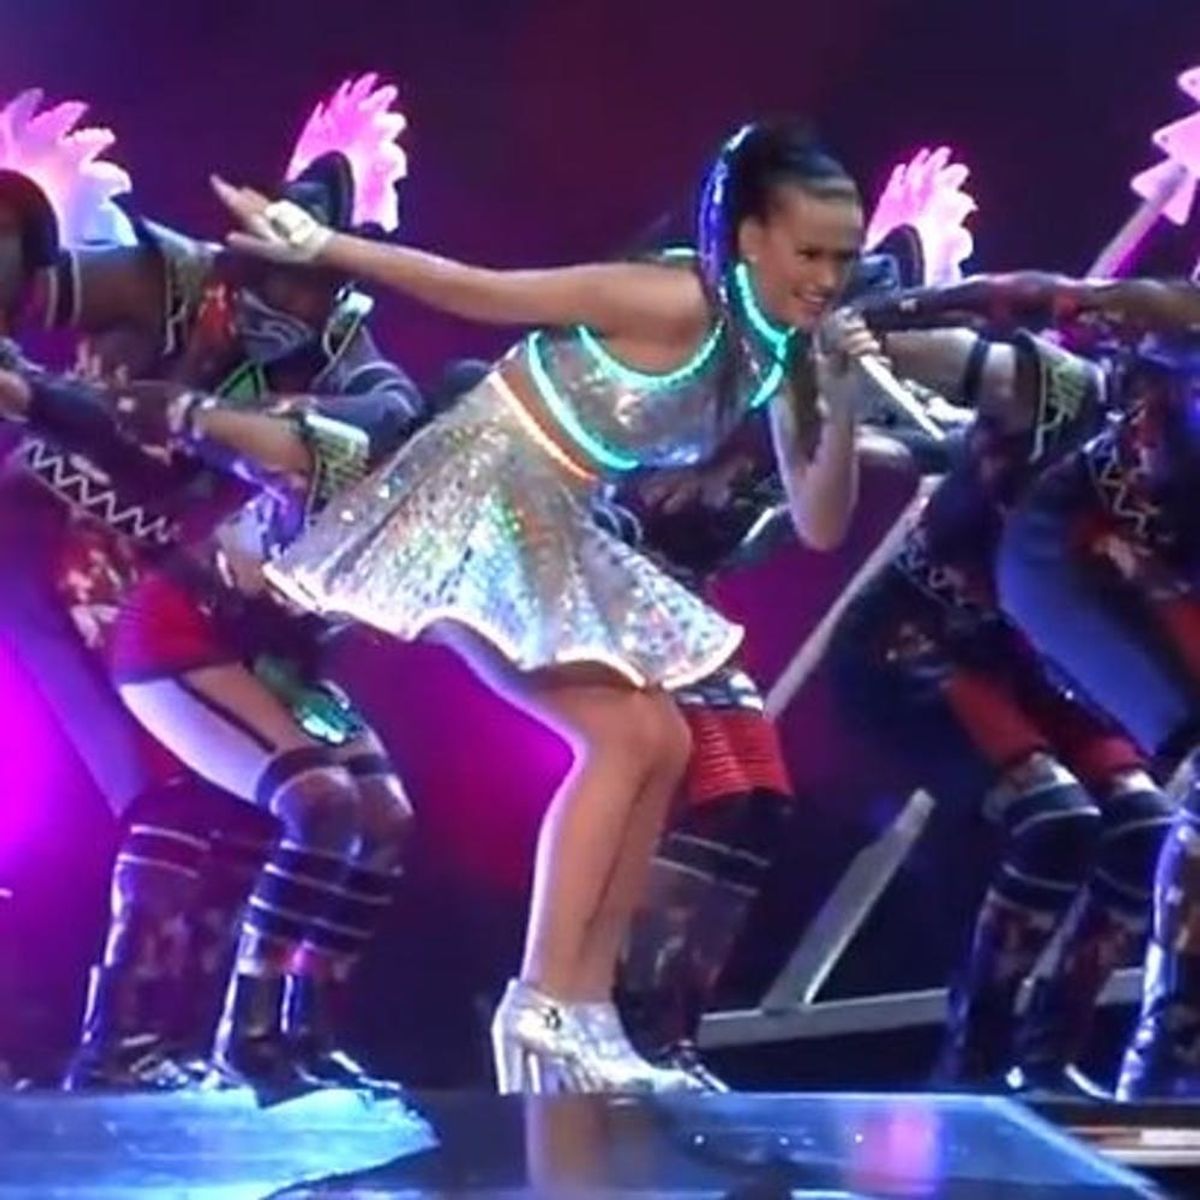 What’s New in 3D Printing? Katy Perry Backup Dancers, 3D Chocolate + More!